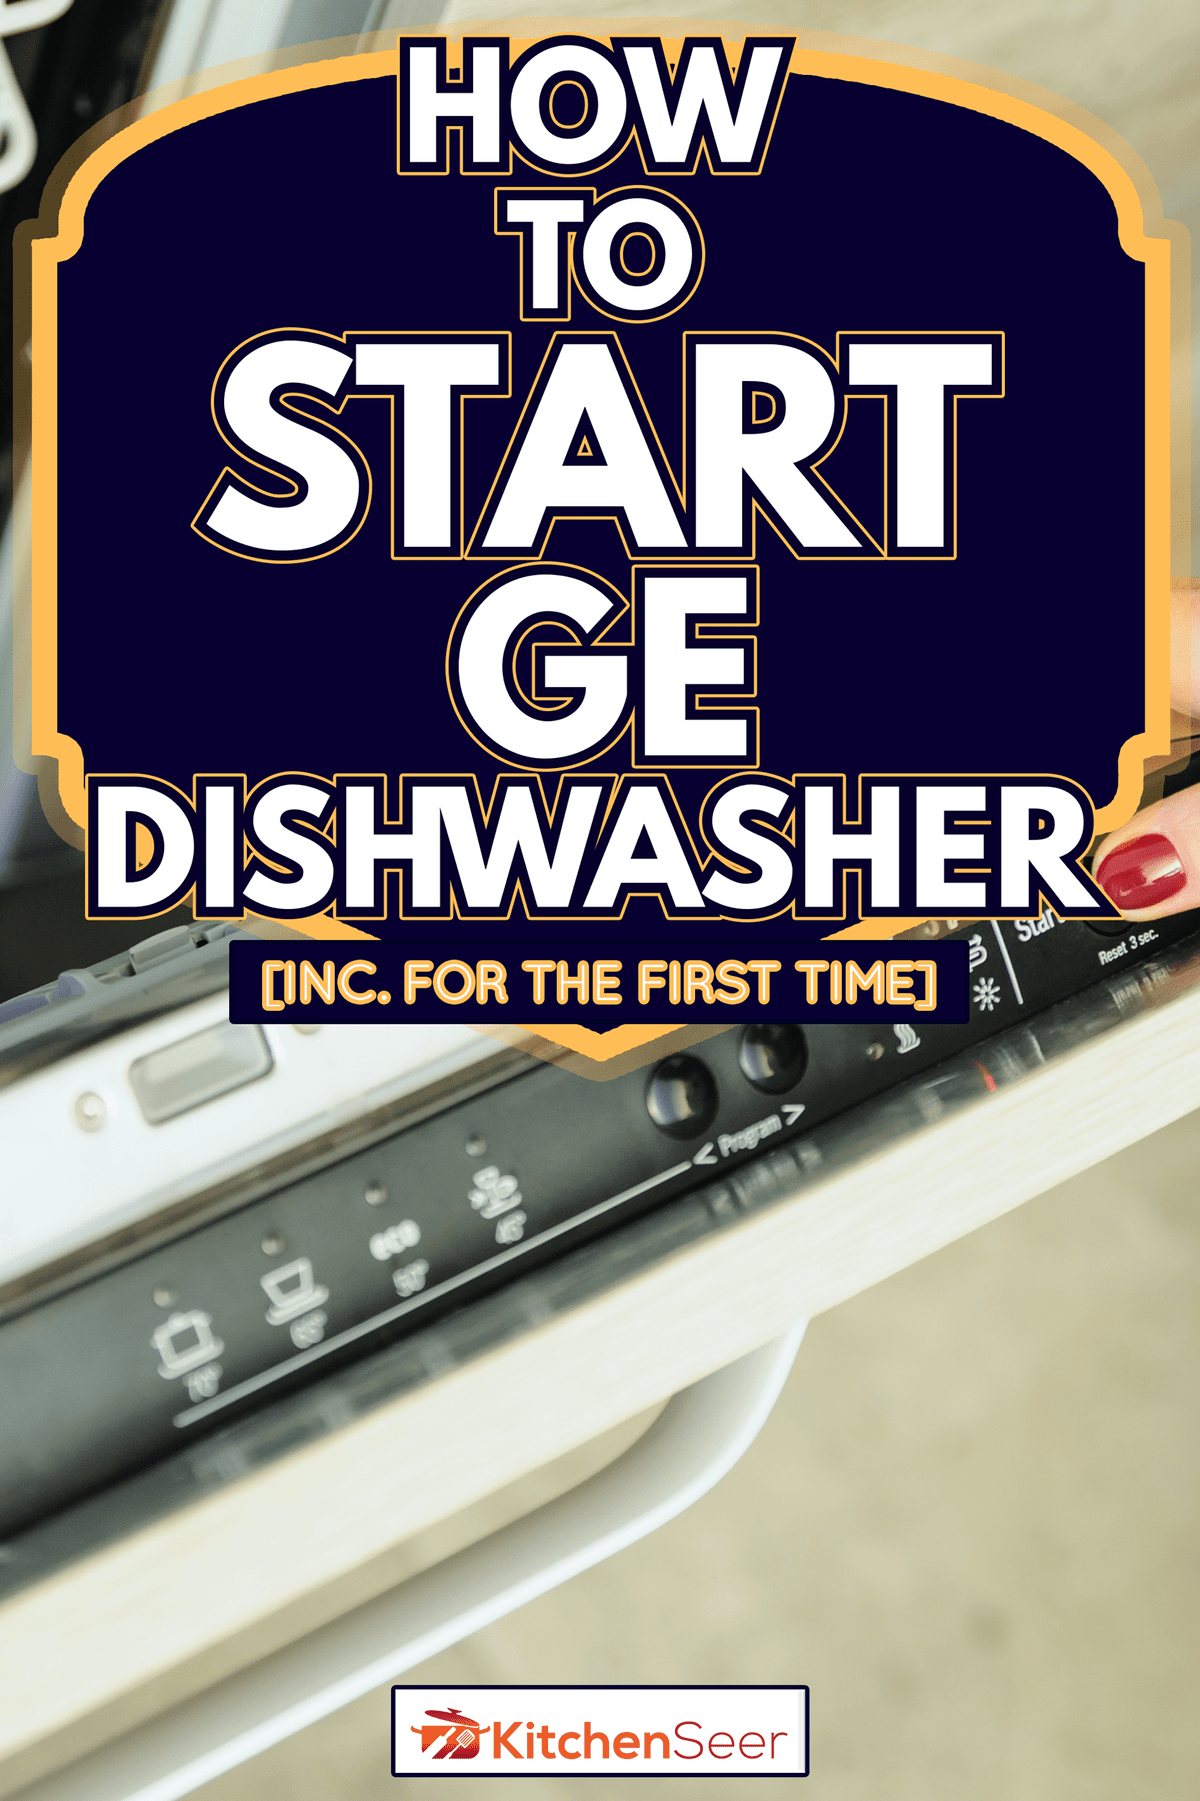 Run the dishwasher machine. Woman's finger pressing the Start button - How To Start GE Dishwasher [Inc. For The First Time]